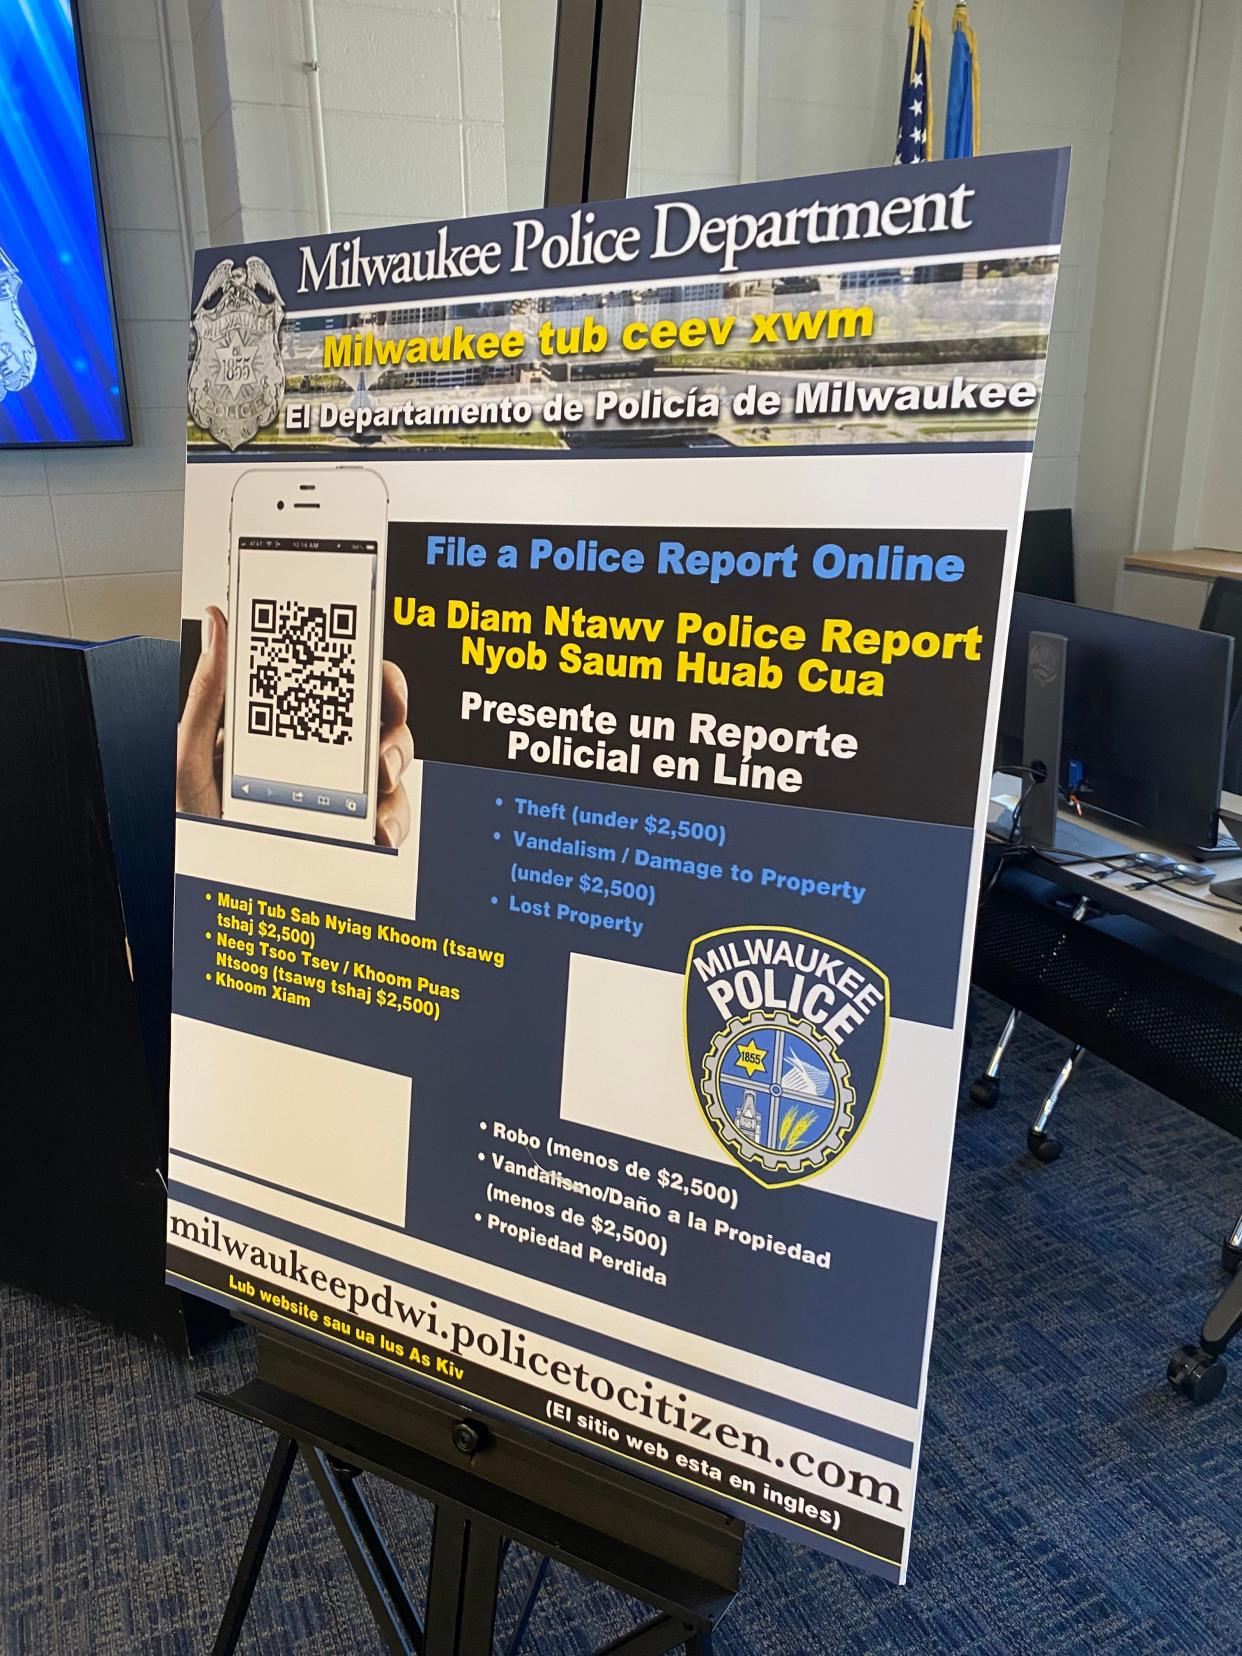 Milwaukee police on Tuesday announced the public now has the option to file reports for certain non-emergencies online, without having to interact with police face-to-face.

The service allows people to file reports of lost property, theft of items valued less than $2,500 and vandalism or damage to property also valued at less than $2,500 through MilwaukeePDWI.PoliceToCitizen.com.